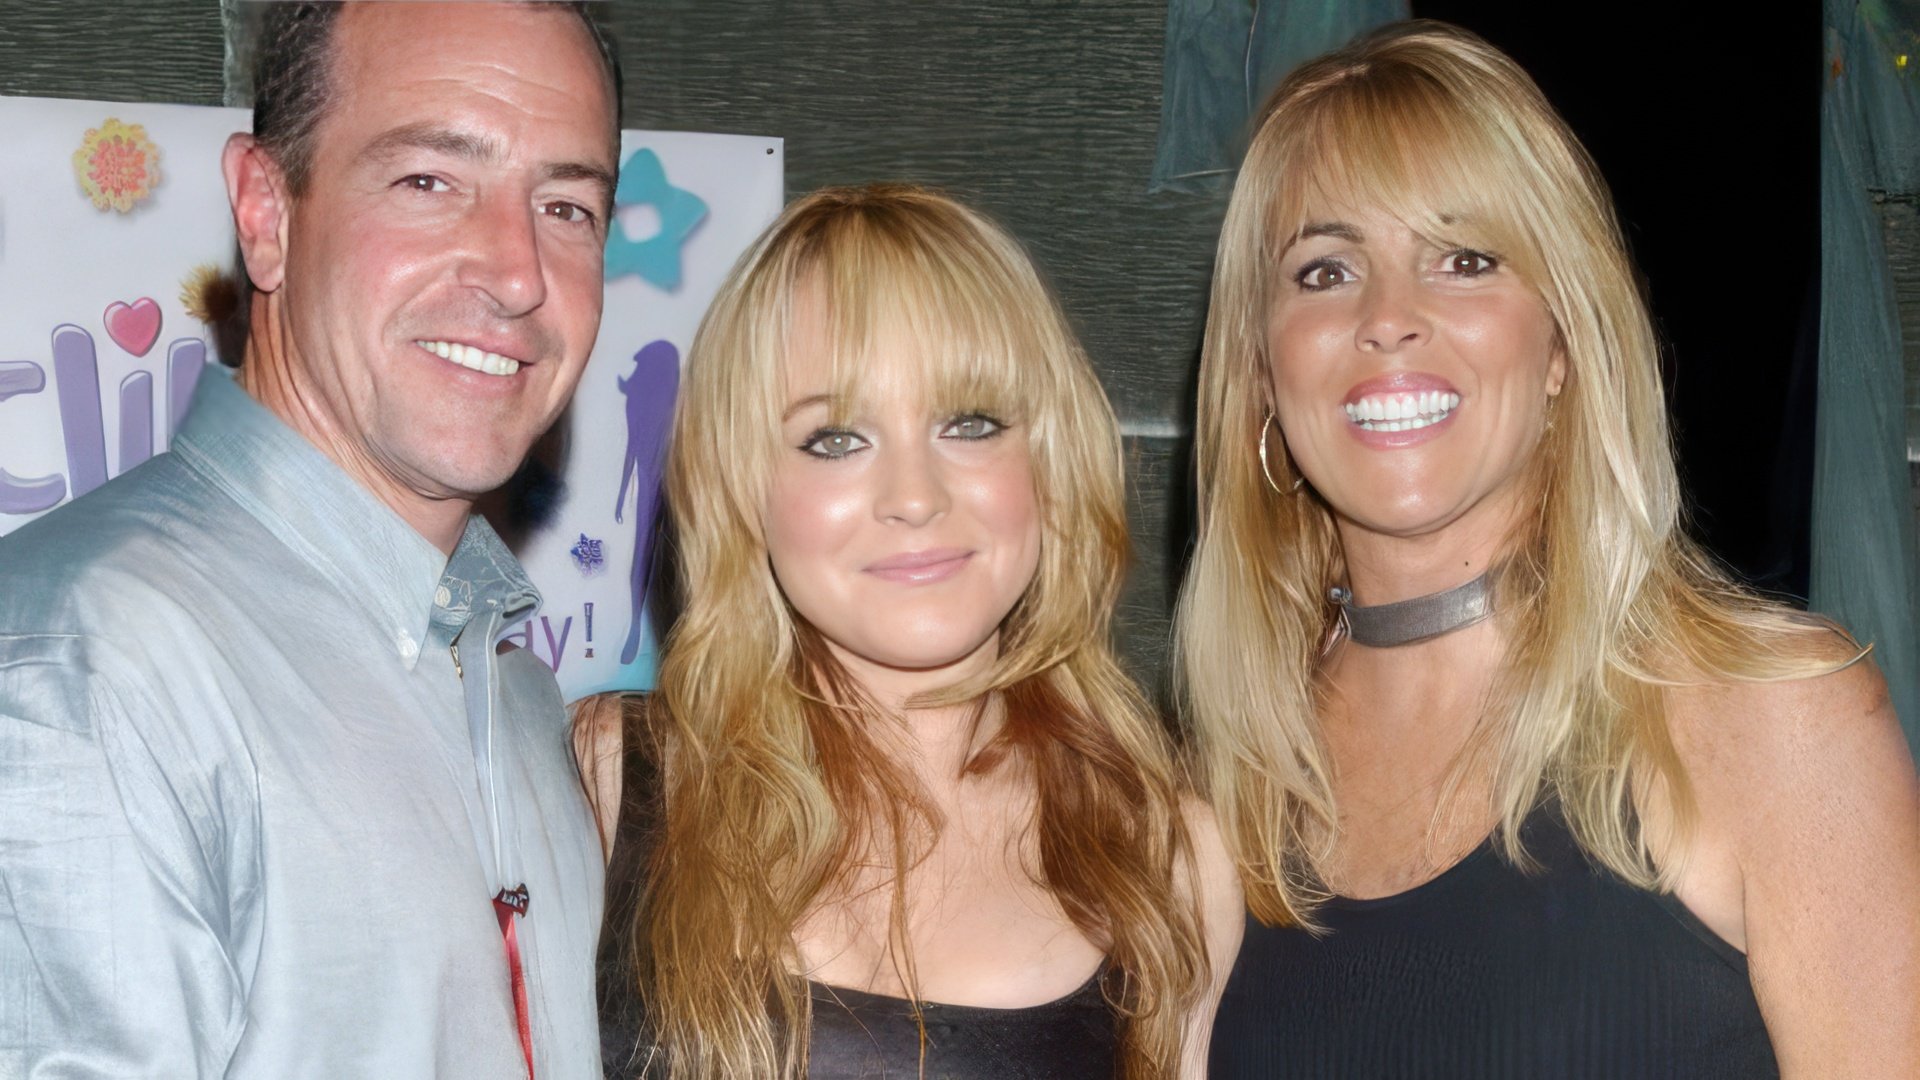 Lindsay Lohan’s parents contributed to their daughter’s career